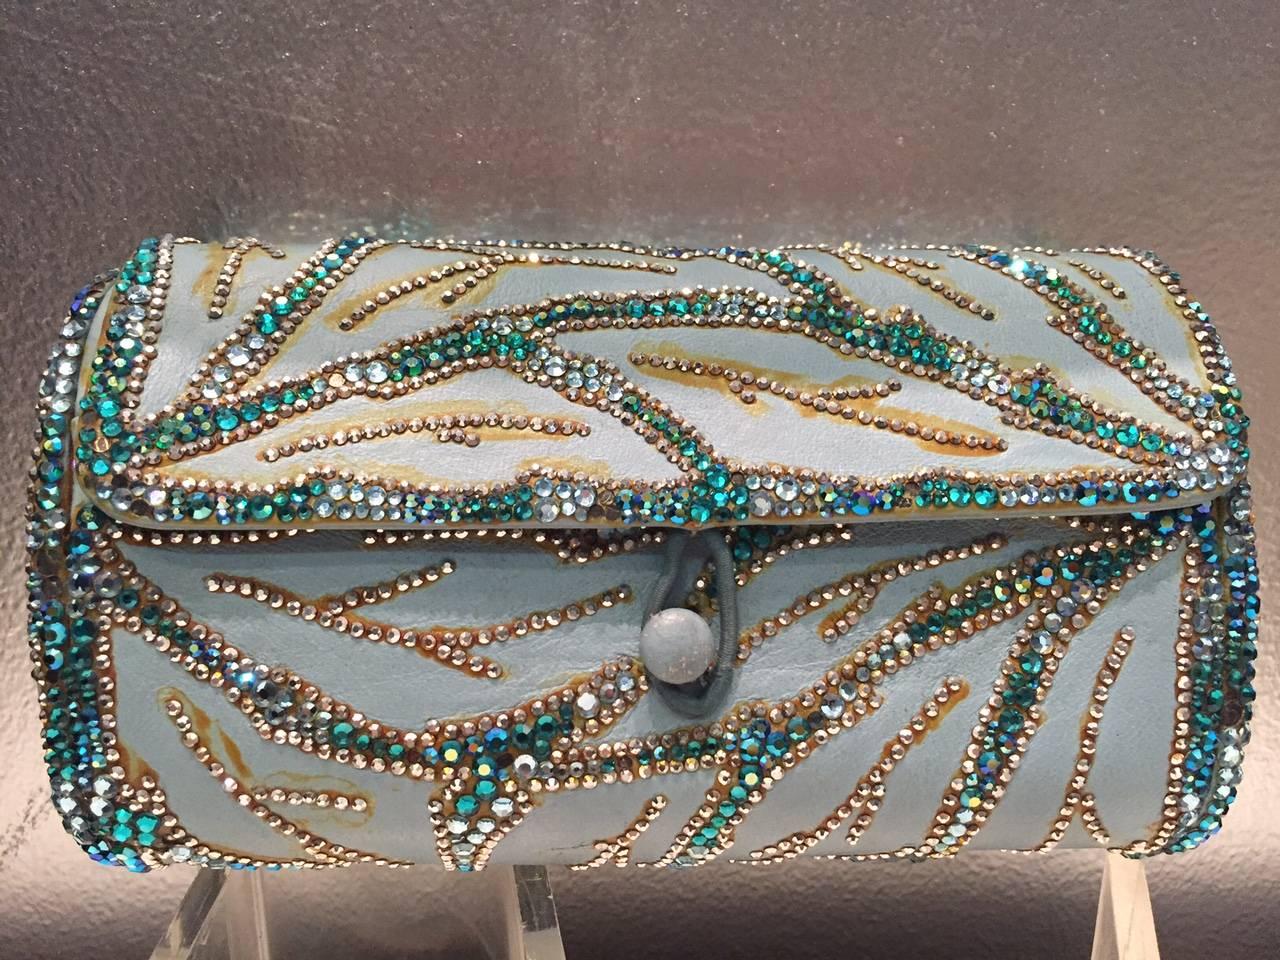 A beautiful 1950s Koret aqua blue leather barrel clutch, embellished with white and azure rhinestones in a branch-like pattern.